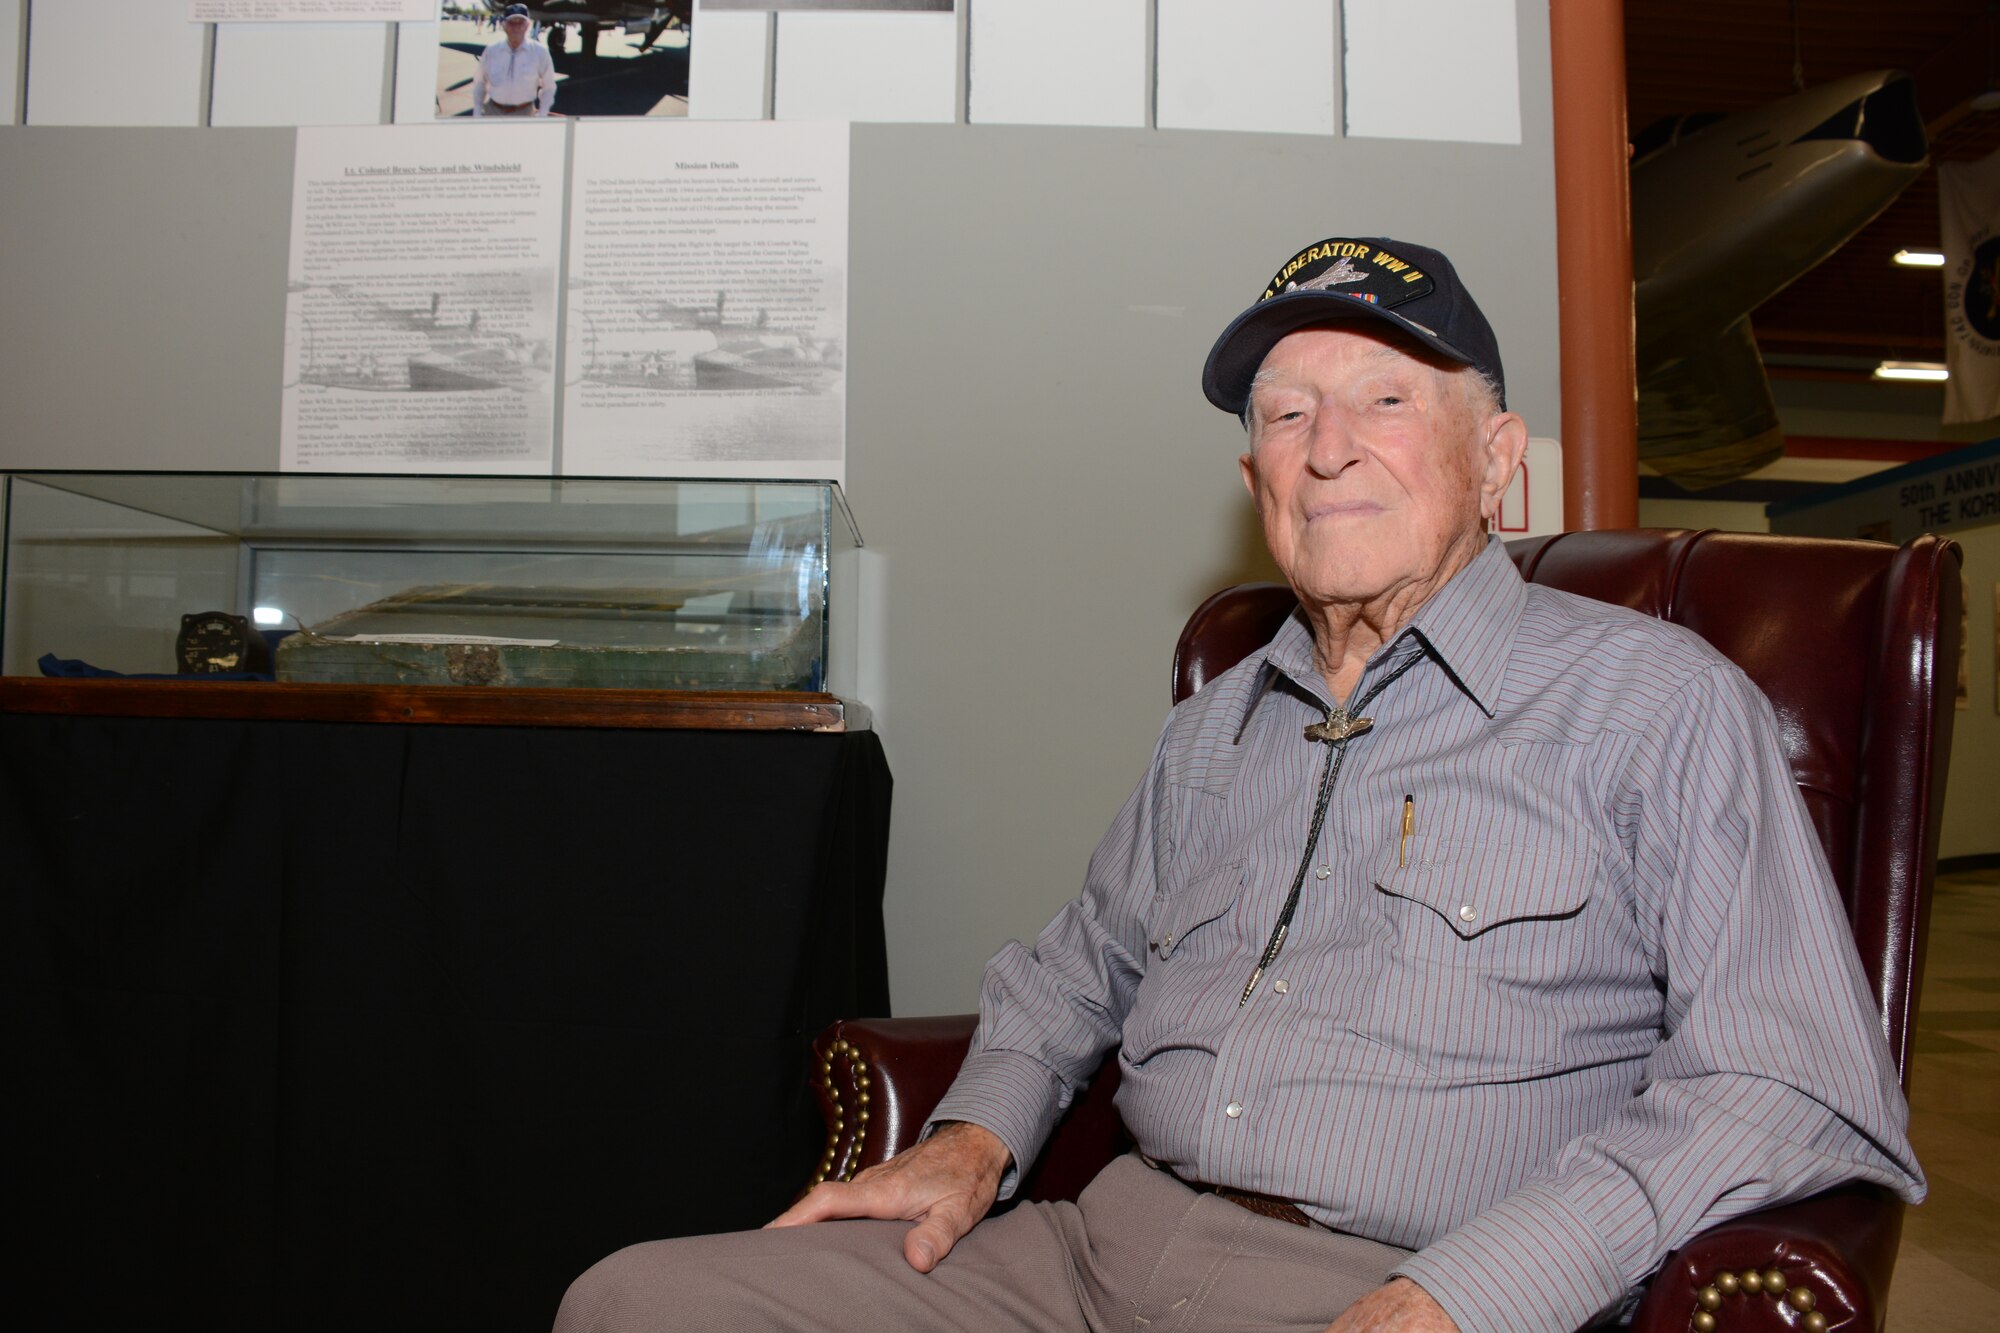 Ret. Lt. Col. Bruce Sooy poses for a photo July 15 at the Travis Air Force Base Heritage Center. Sooy flew 23 missions during World War II before being shot down and captured as a prisoner of war. (U.S. Air Force photo by Airman 1st Class Amber Carter)